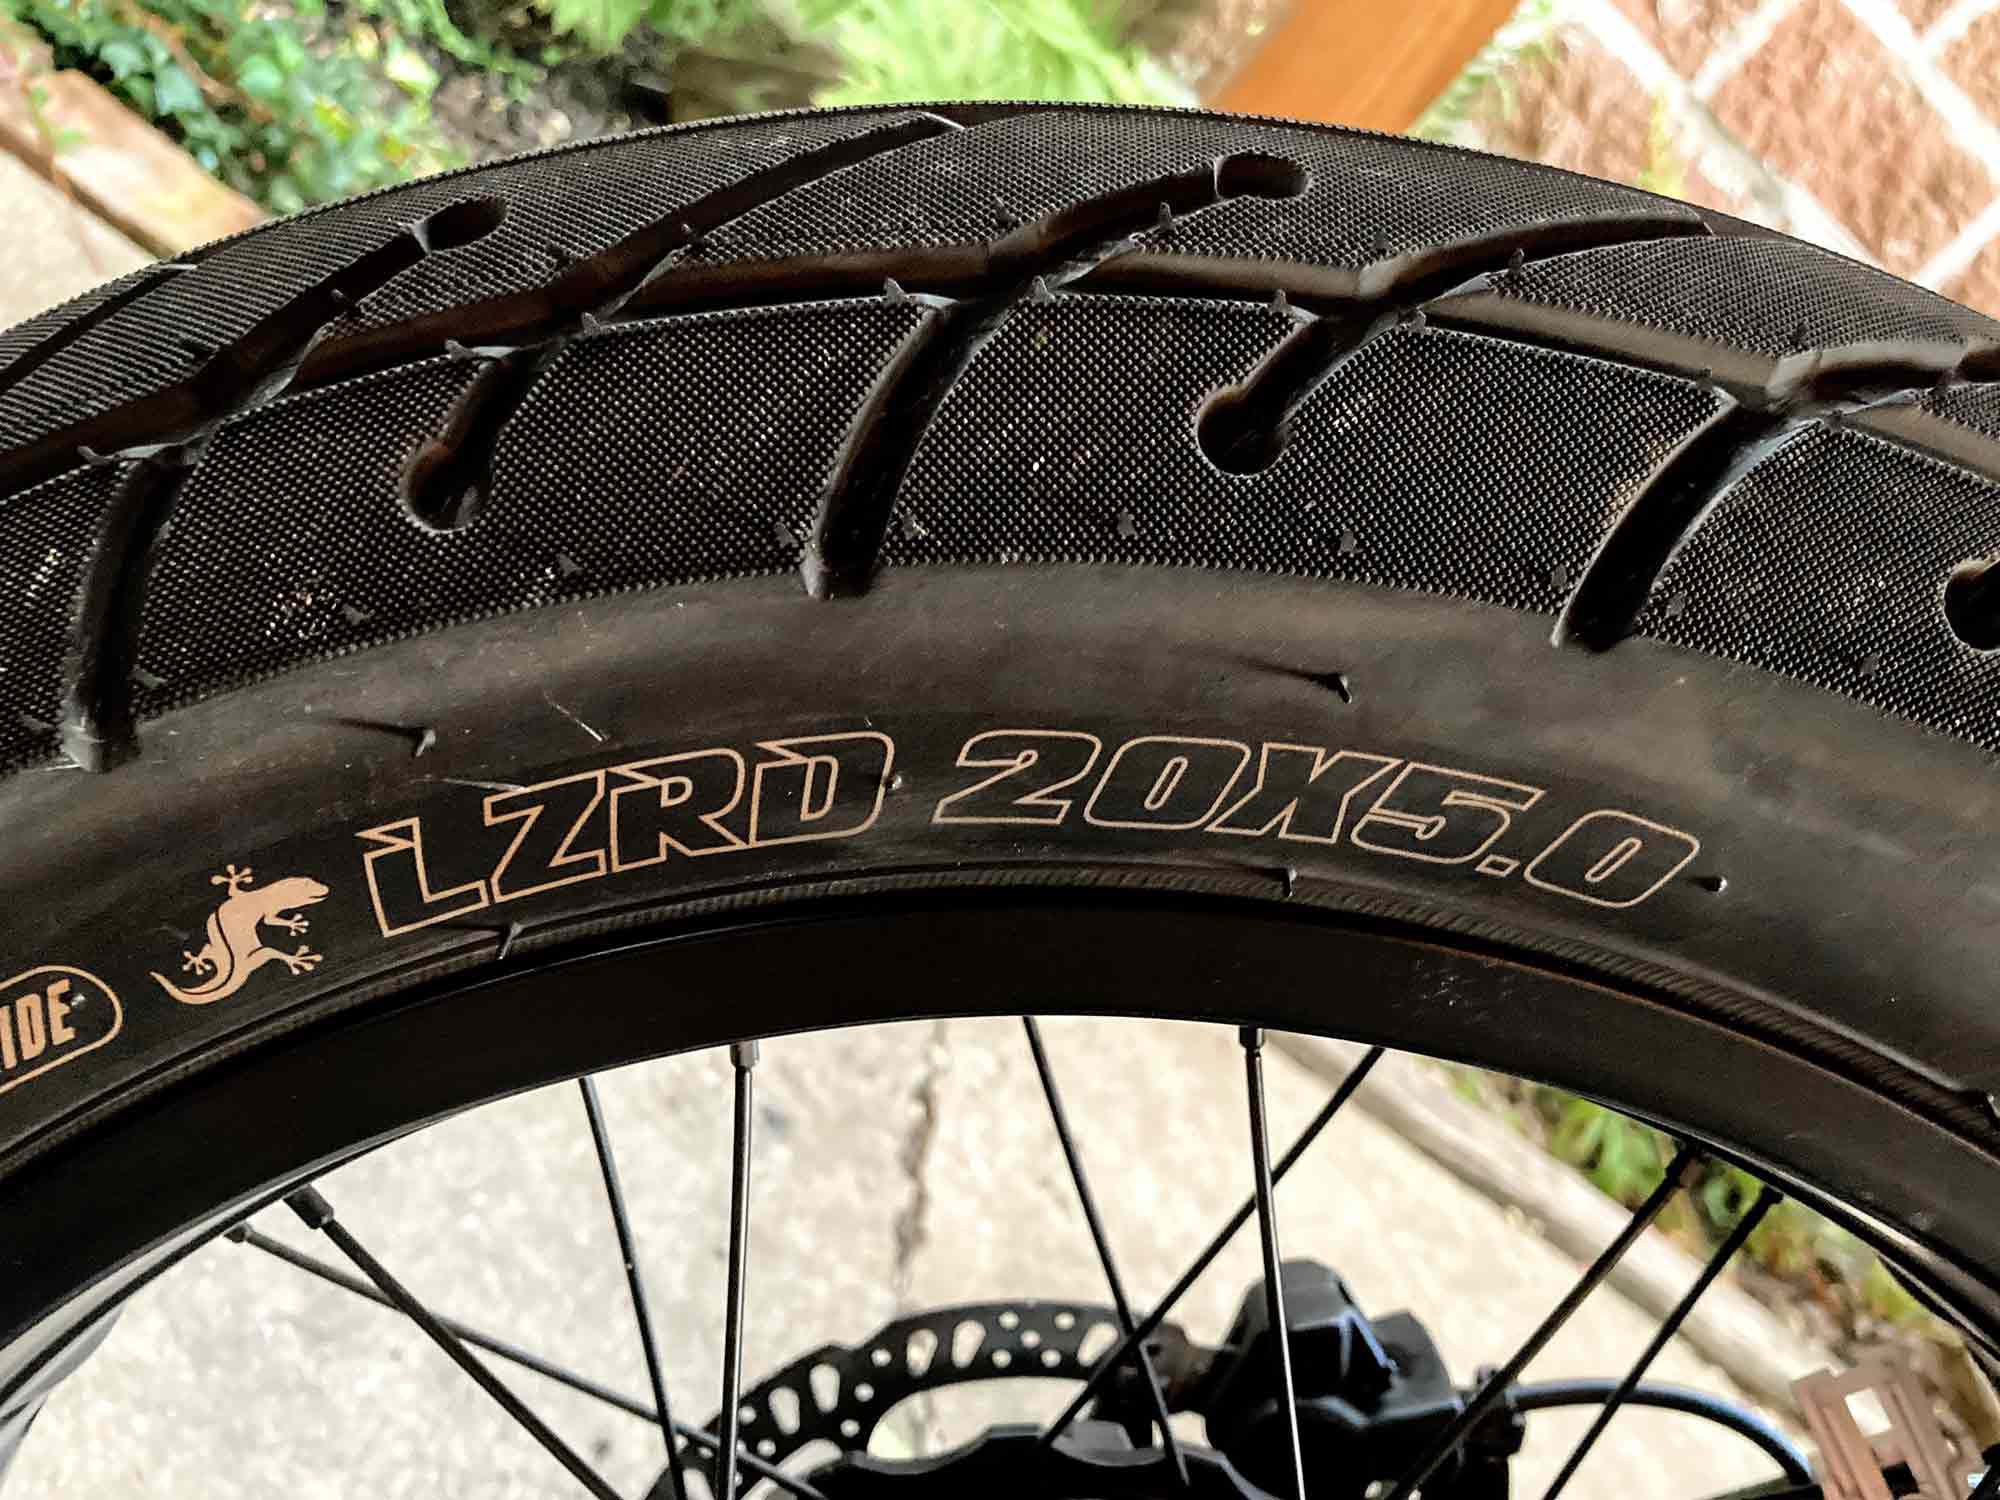 Ample LZRD 20 x 5.0 rear tire with micro-knurling, for added grip (as long as they don’t wear out).